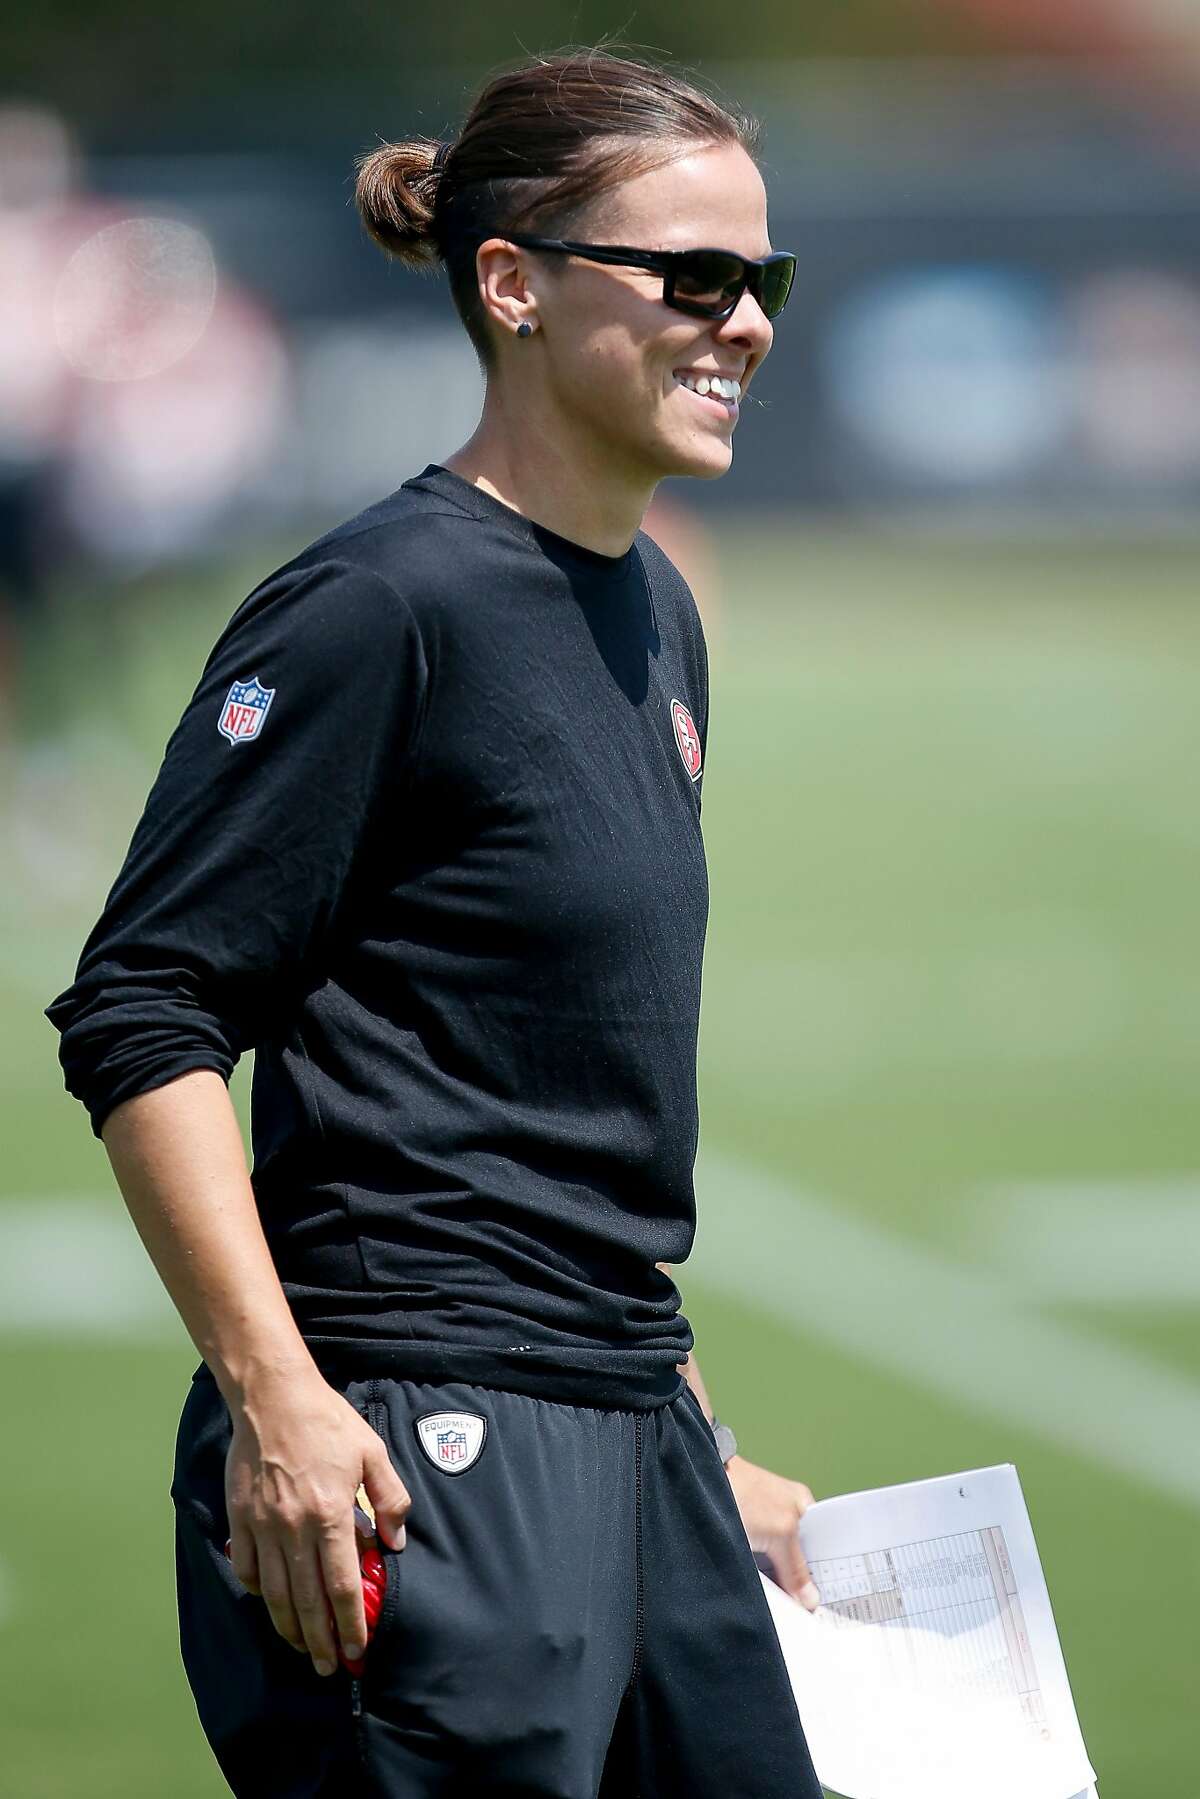 San Francisco 49ers assistant coach Katie Sowers smiles as she watches players run through drills during practice at the San Francisco 49ers training facility on Wednesday, August 23, 2017, in Santa Clara California. Sowers, 31, made more history, becoming the NFL's first openly gay coach. San Francisco 49ers officially hired Katie Sowers for the 2017 season last week, making her the team's first female assistant coach.